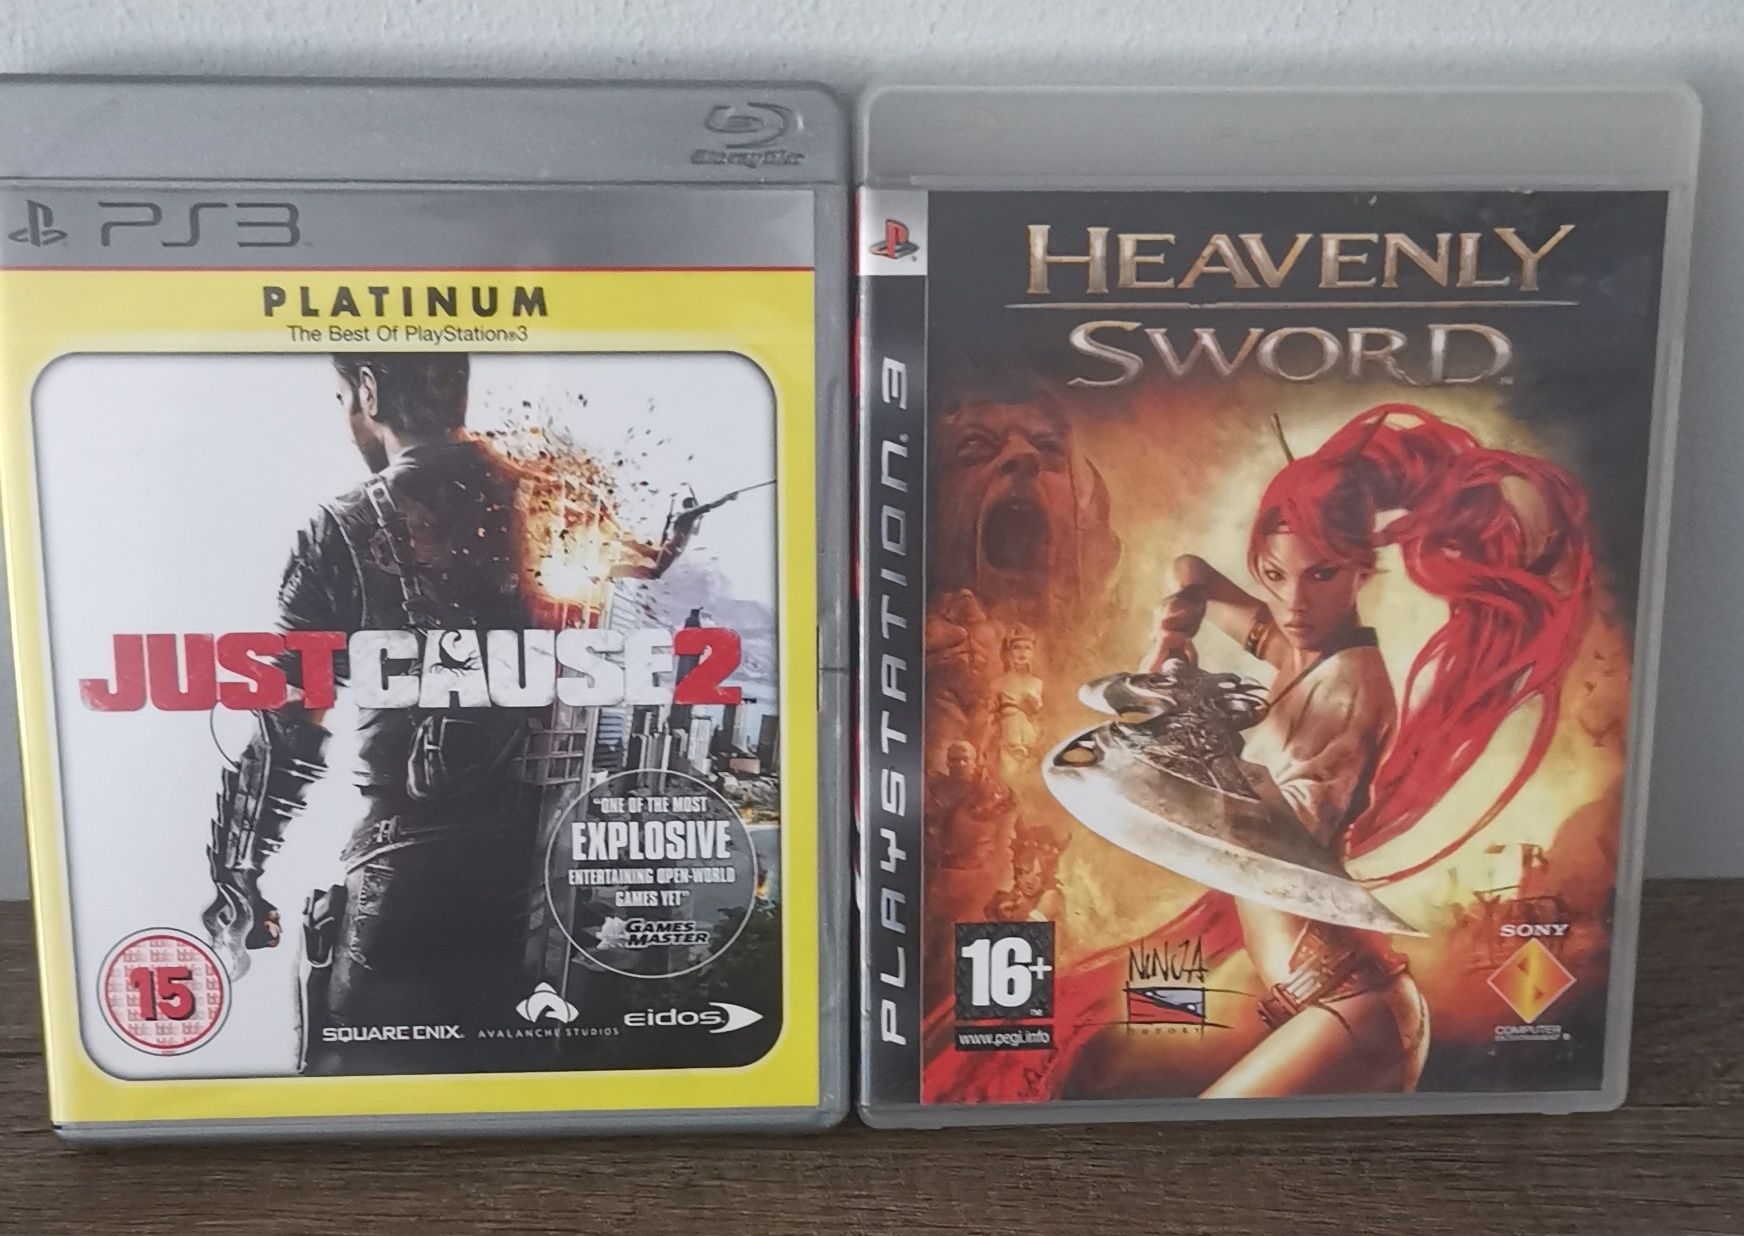 Heavenly sword & Just cause 2 playstation 3